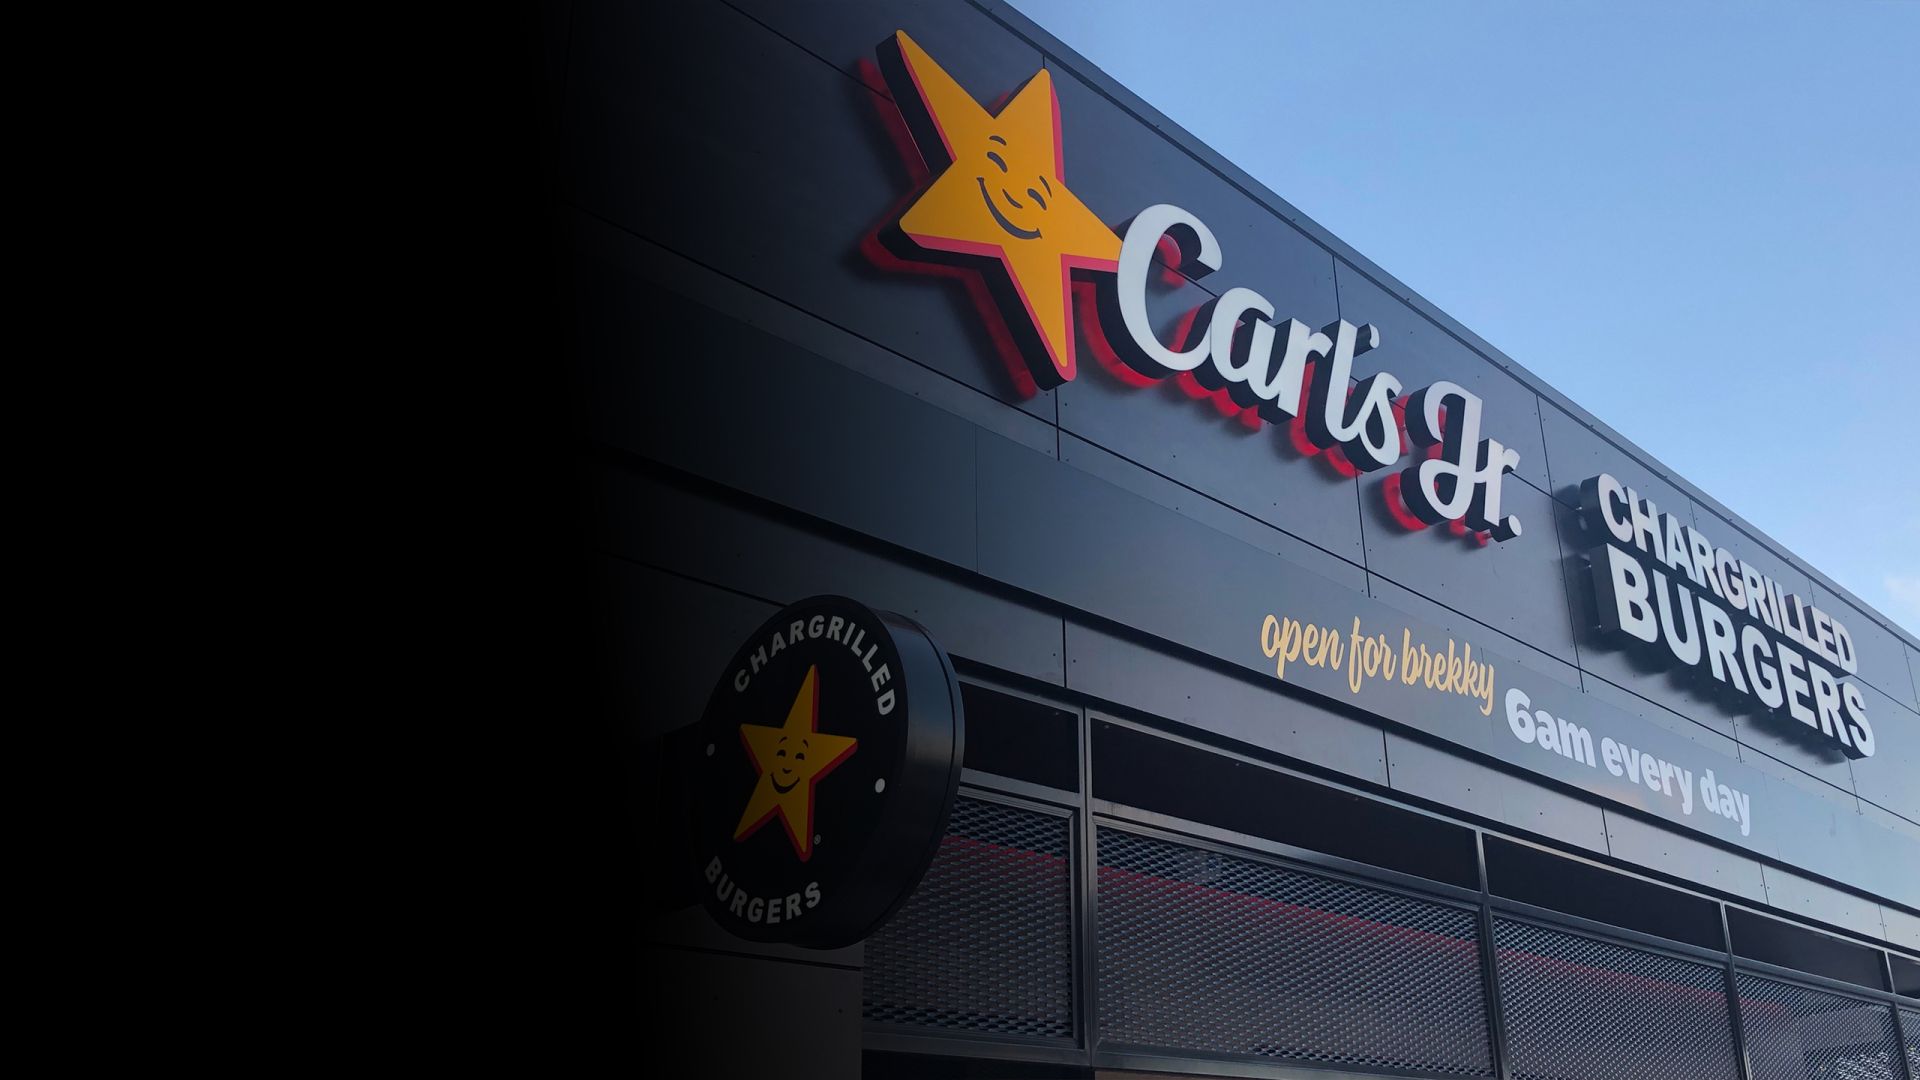 Carls Jr illuminated signage and fabricated letters